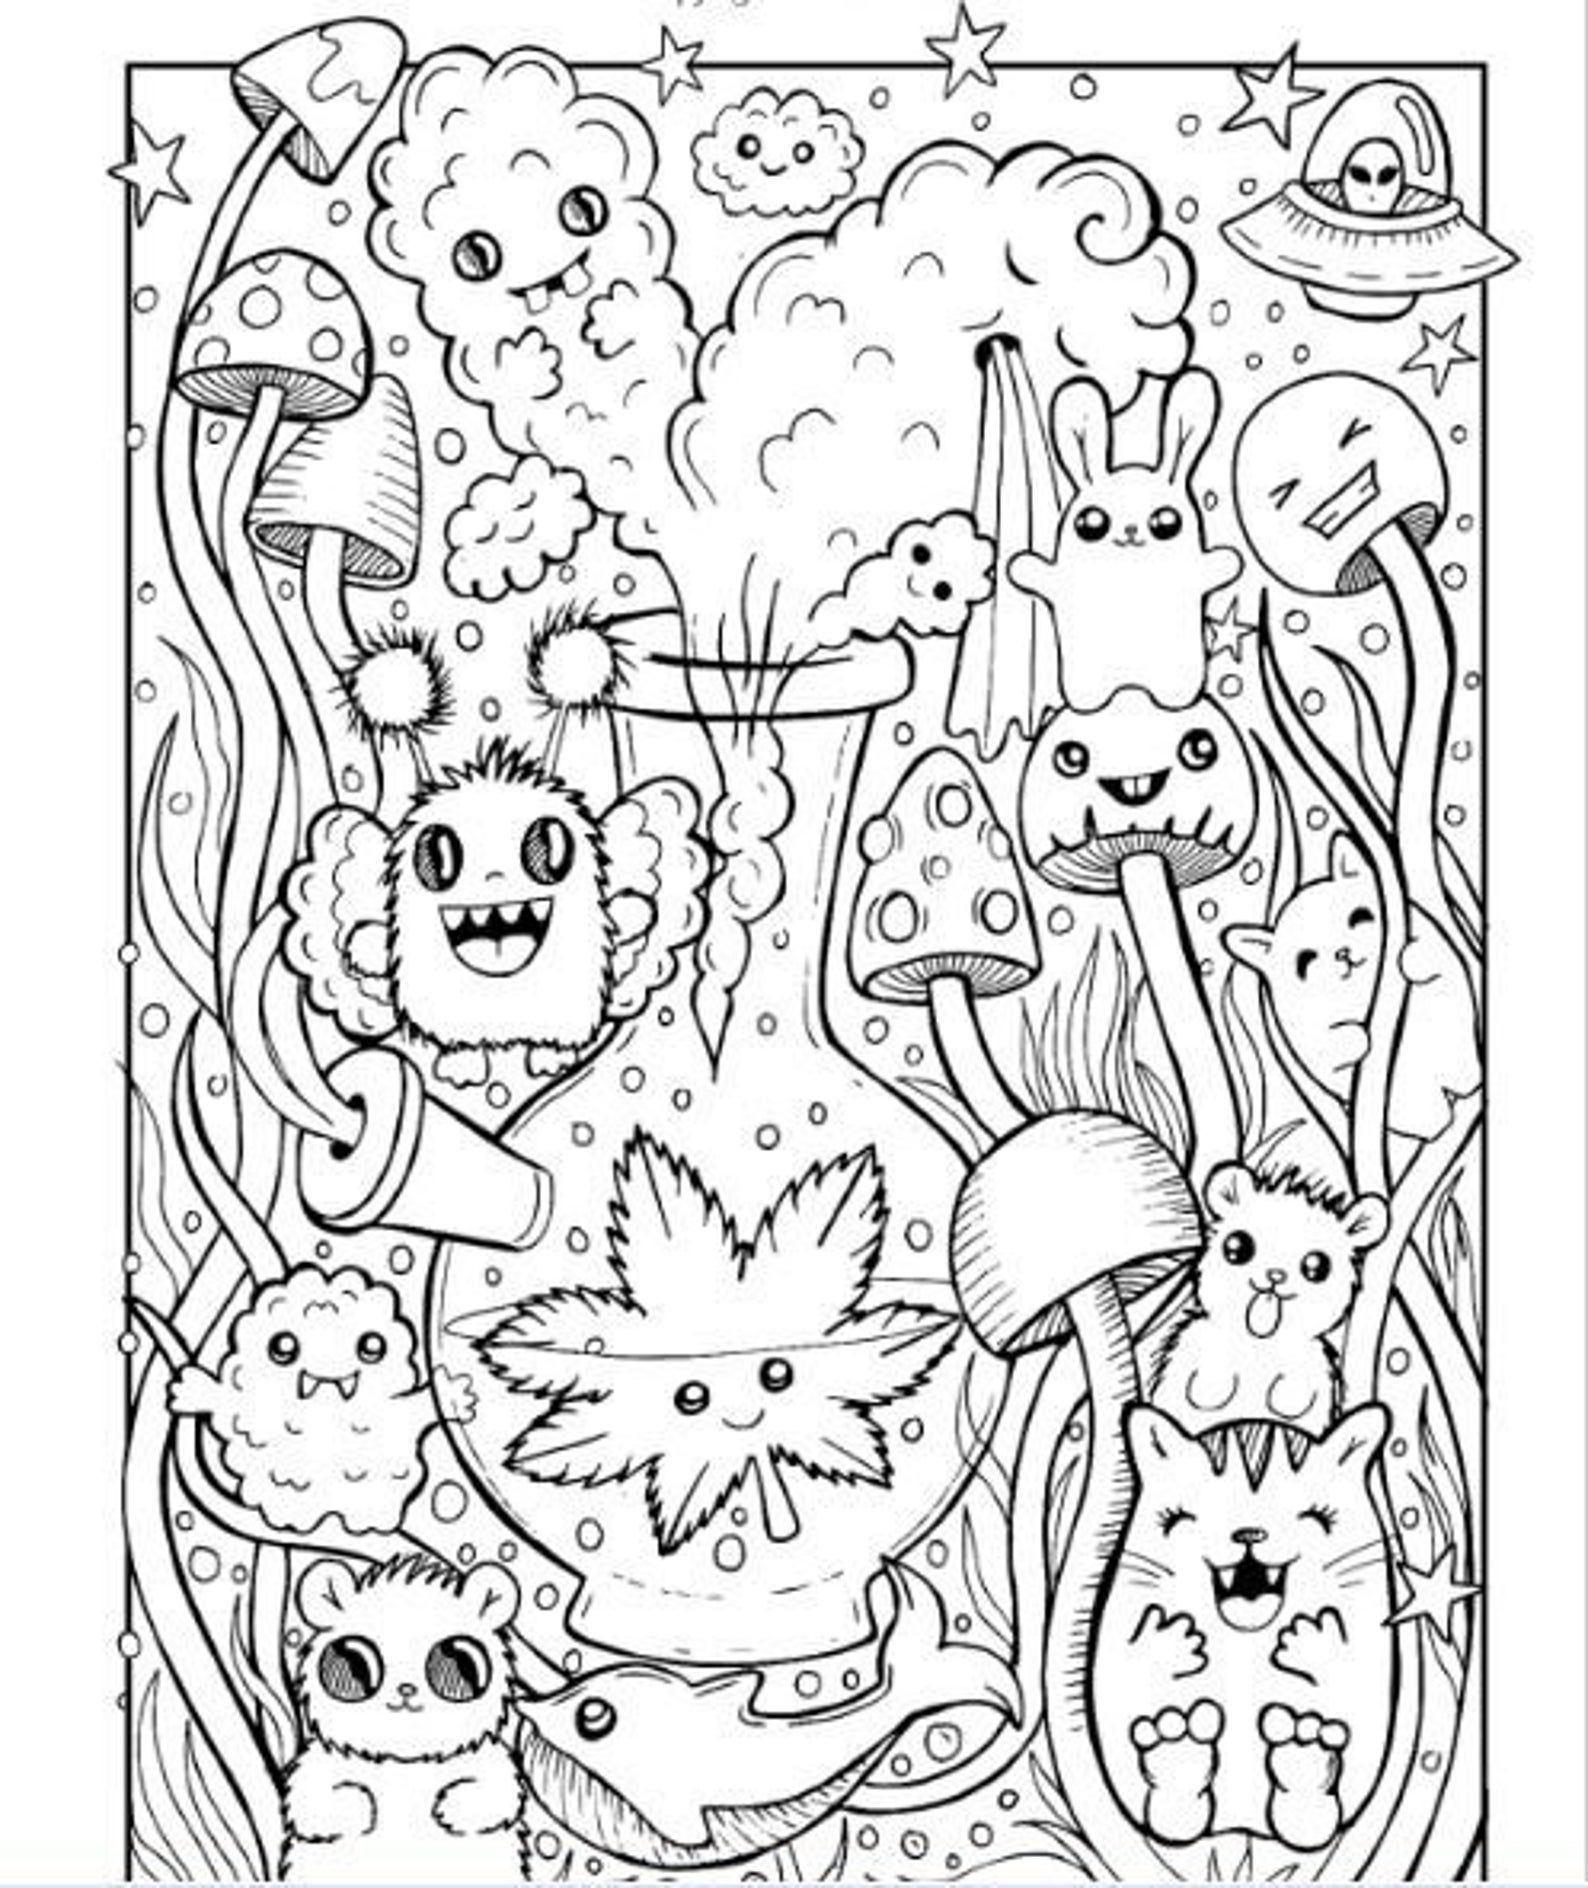 Stoner Coloring Pages to Print